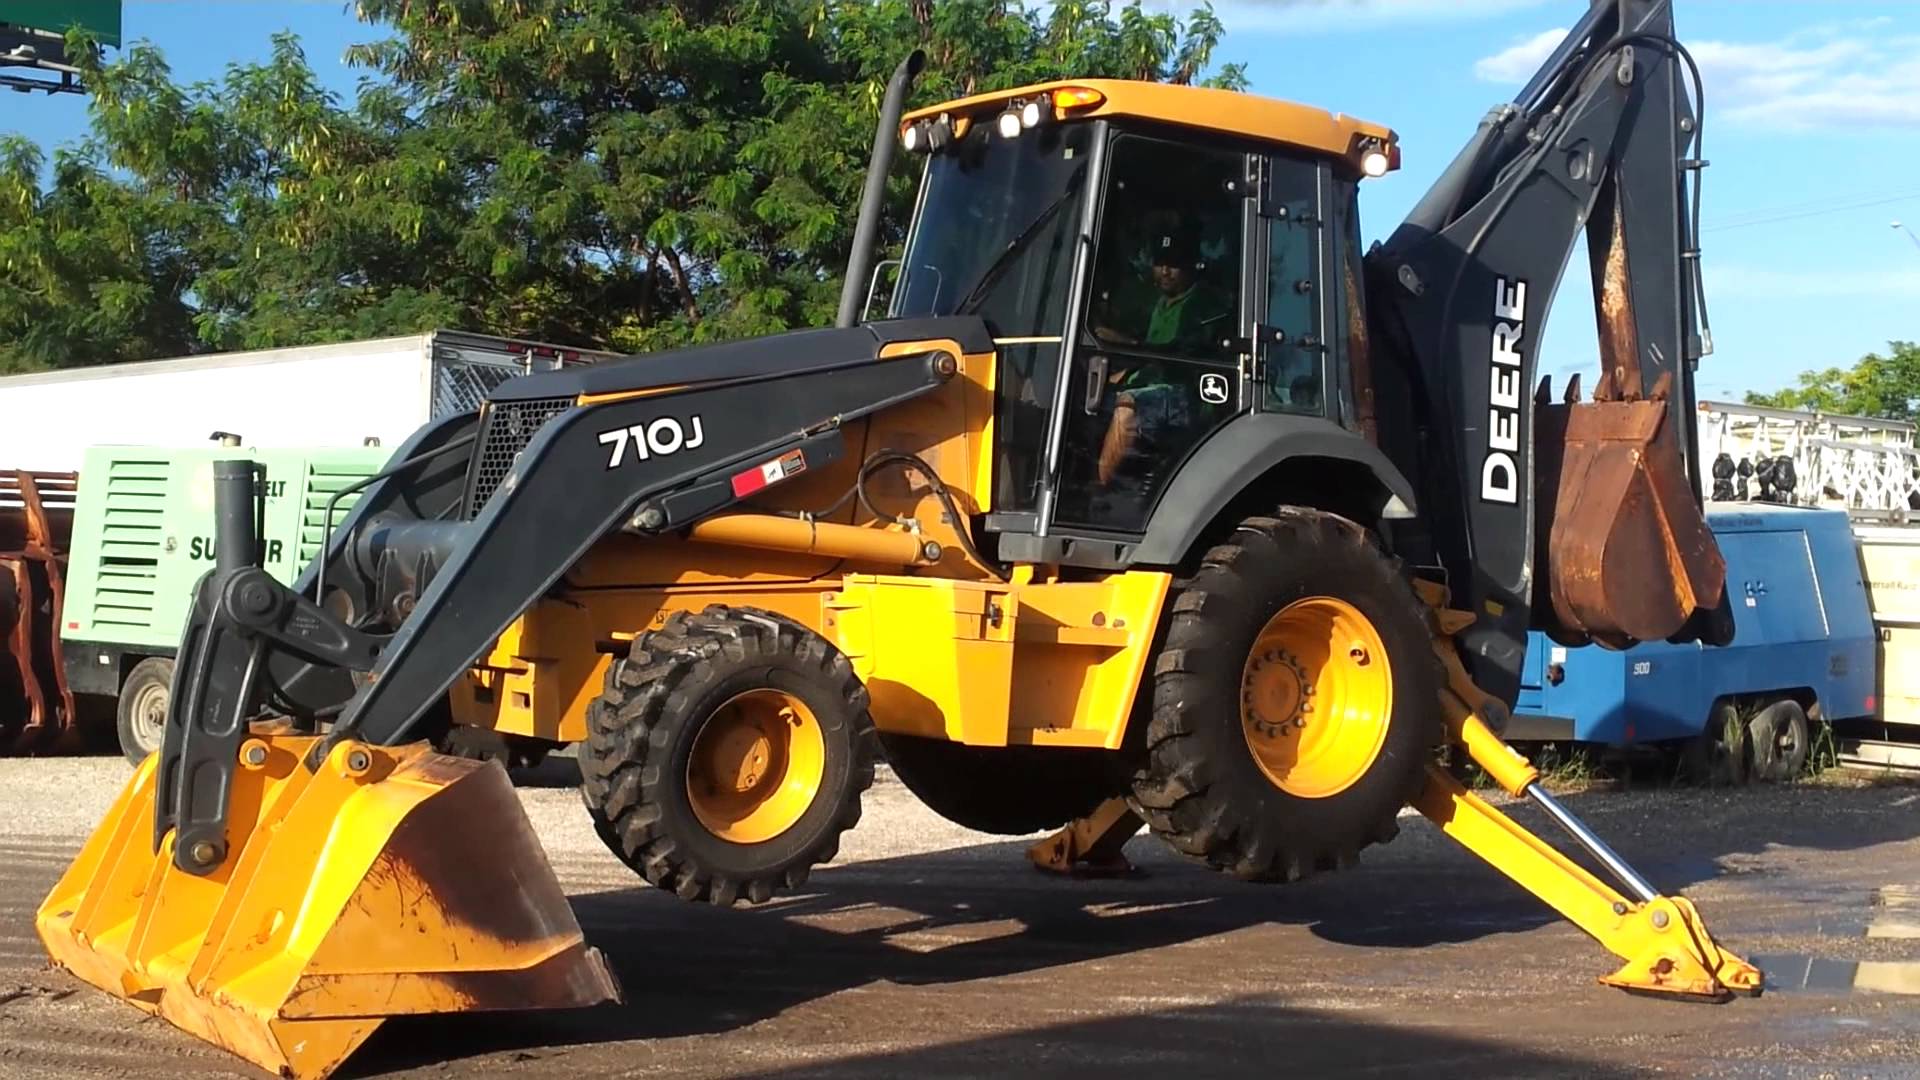 2008 John Deere 710J in action. SOLD @ TractoMax - YouTube